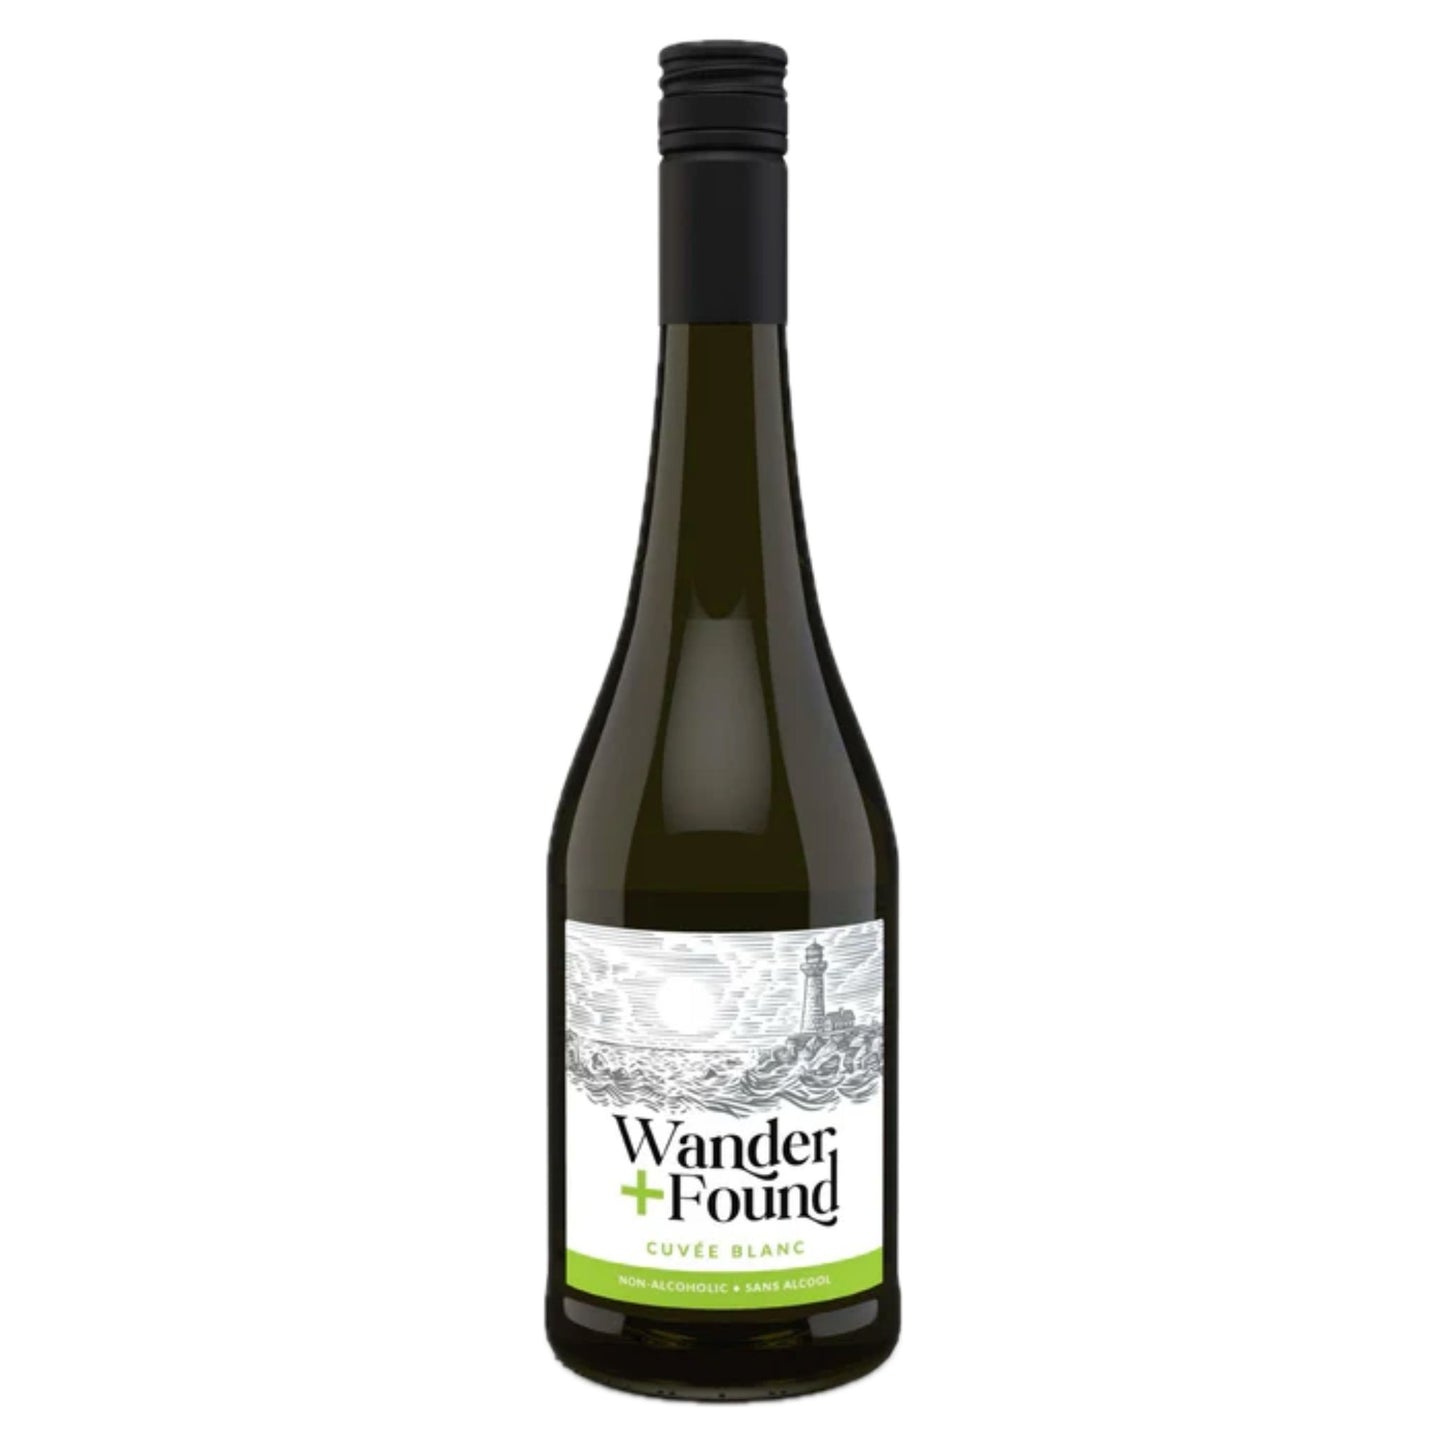 Wander and Found Non-Alcoholic Cuveé Blanc is available at Knyota Non-Alcoholic Drinks.